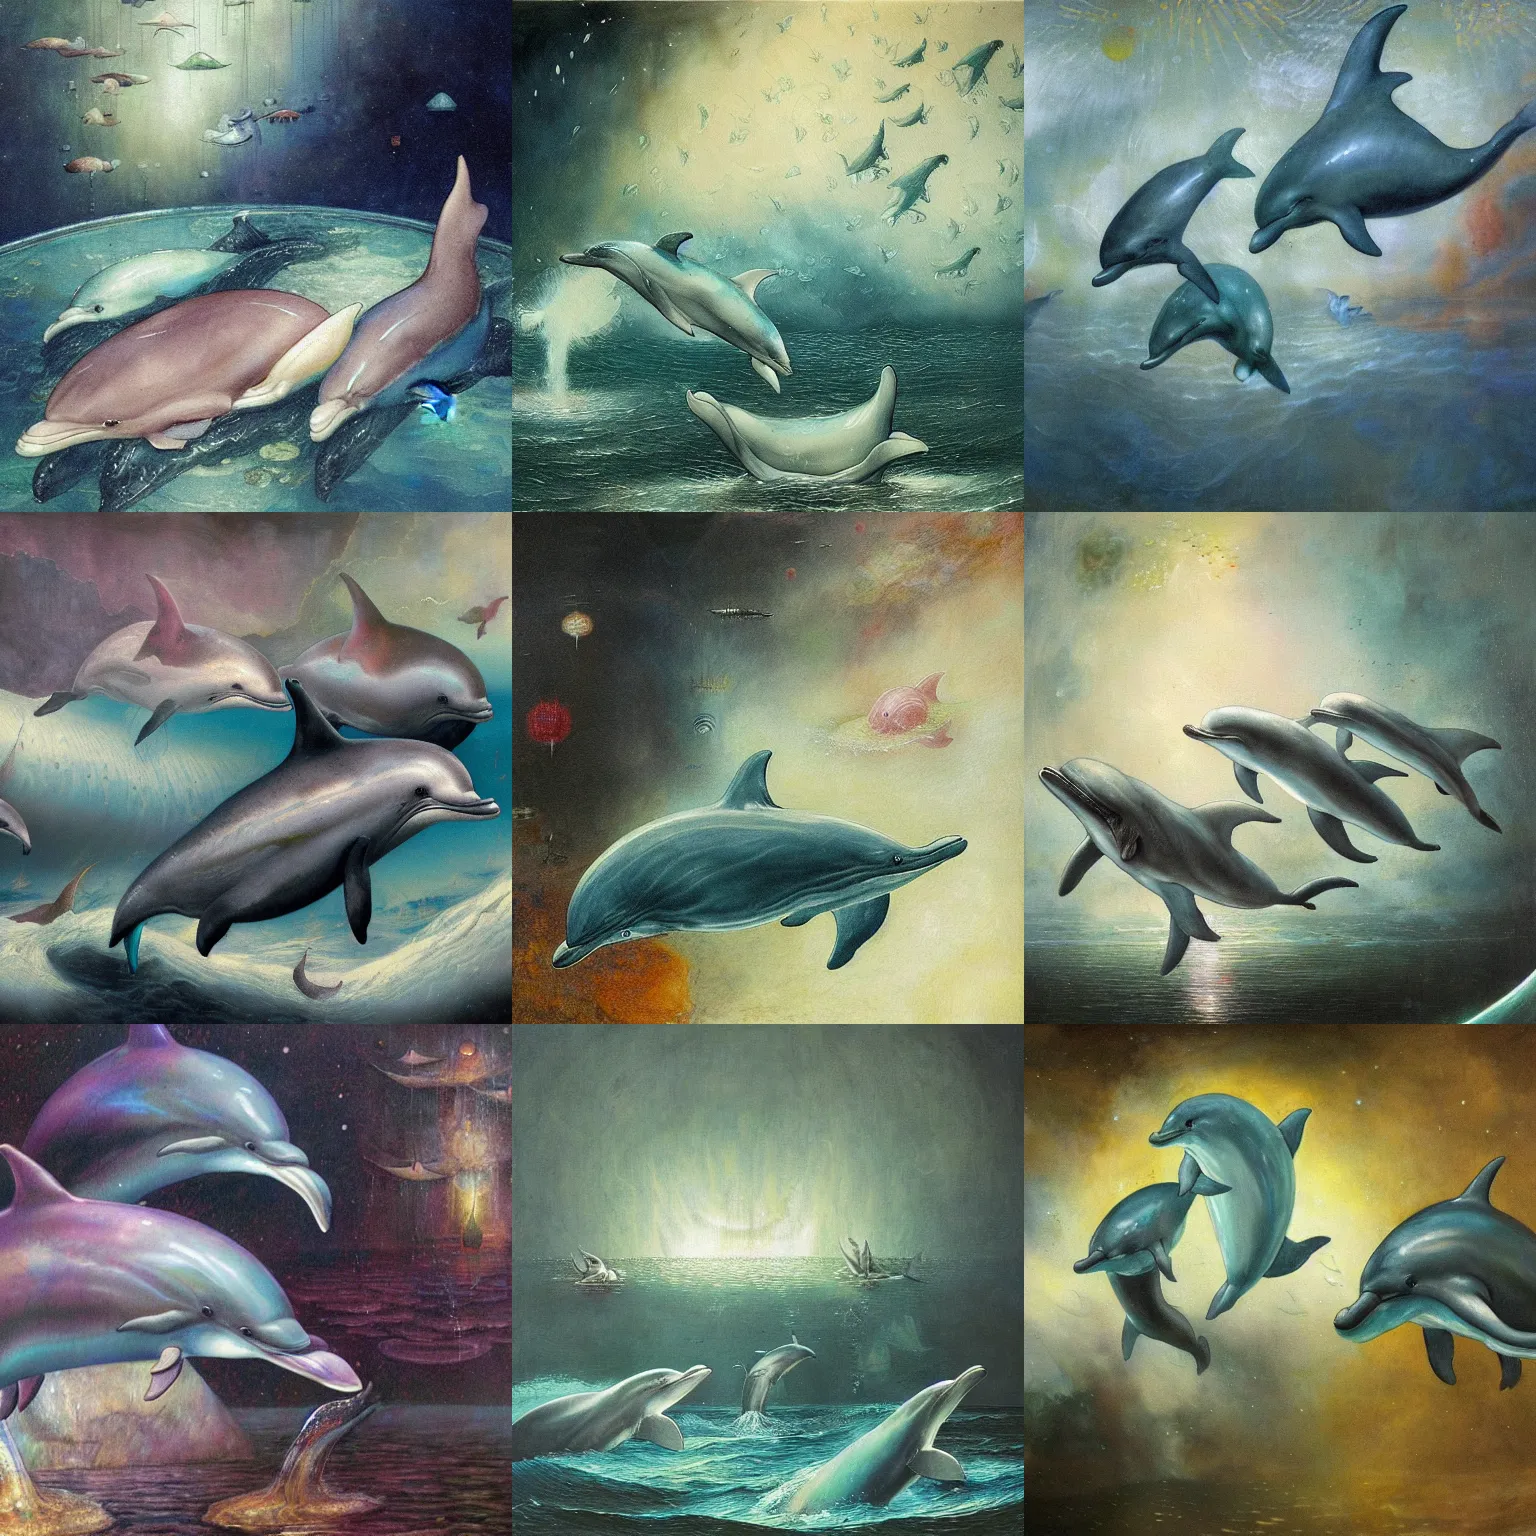 Prompt: a detailed oil painting of calm alien dolphins floating in a colorfully air - filled tank by rembrandt van rijn and santiago caruso, chillwave